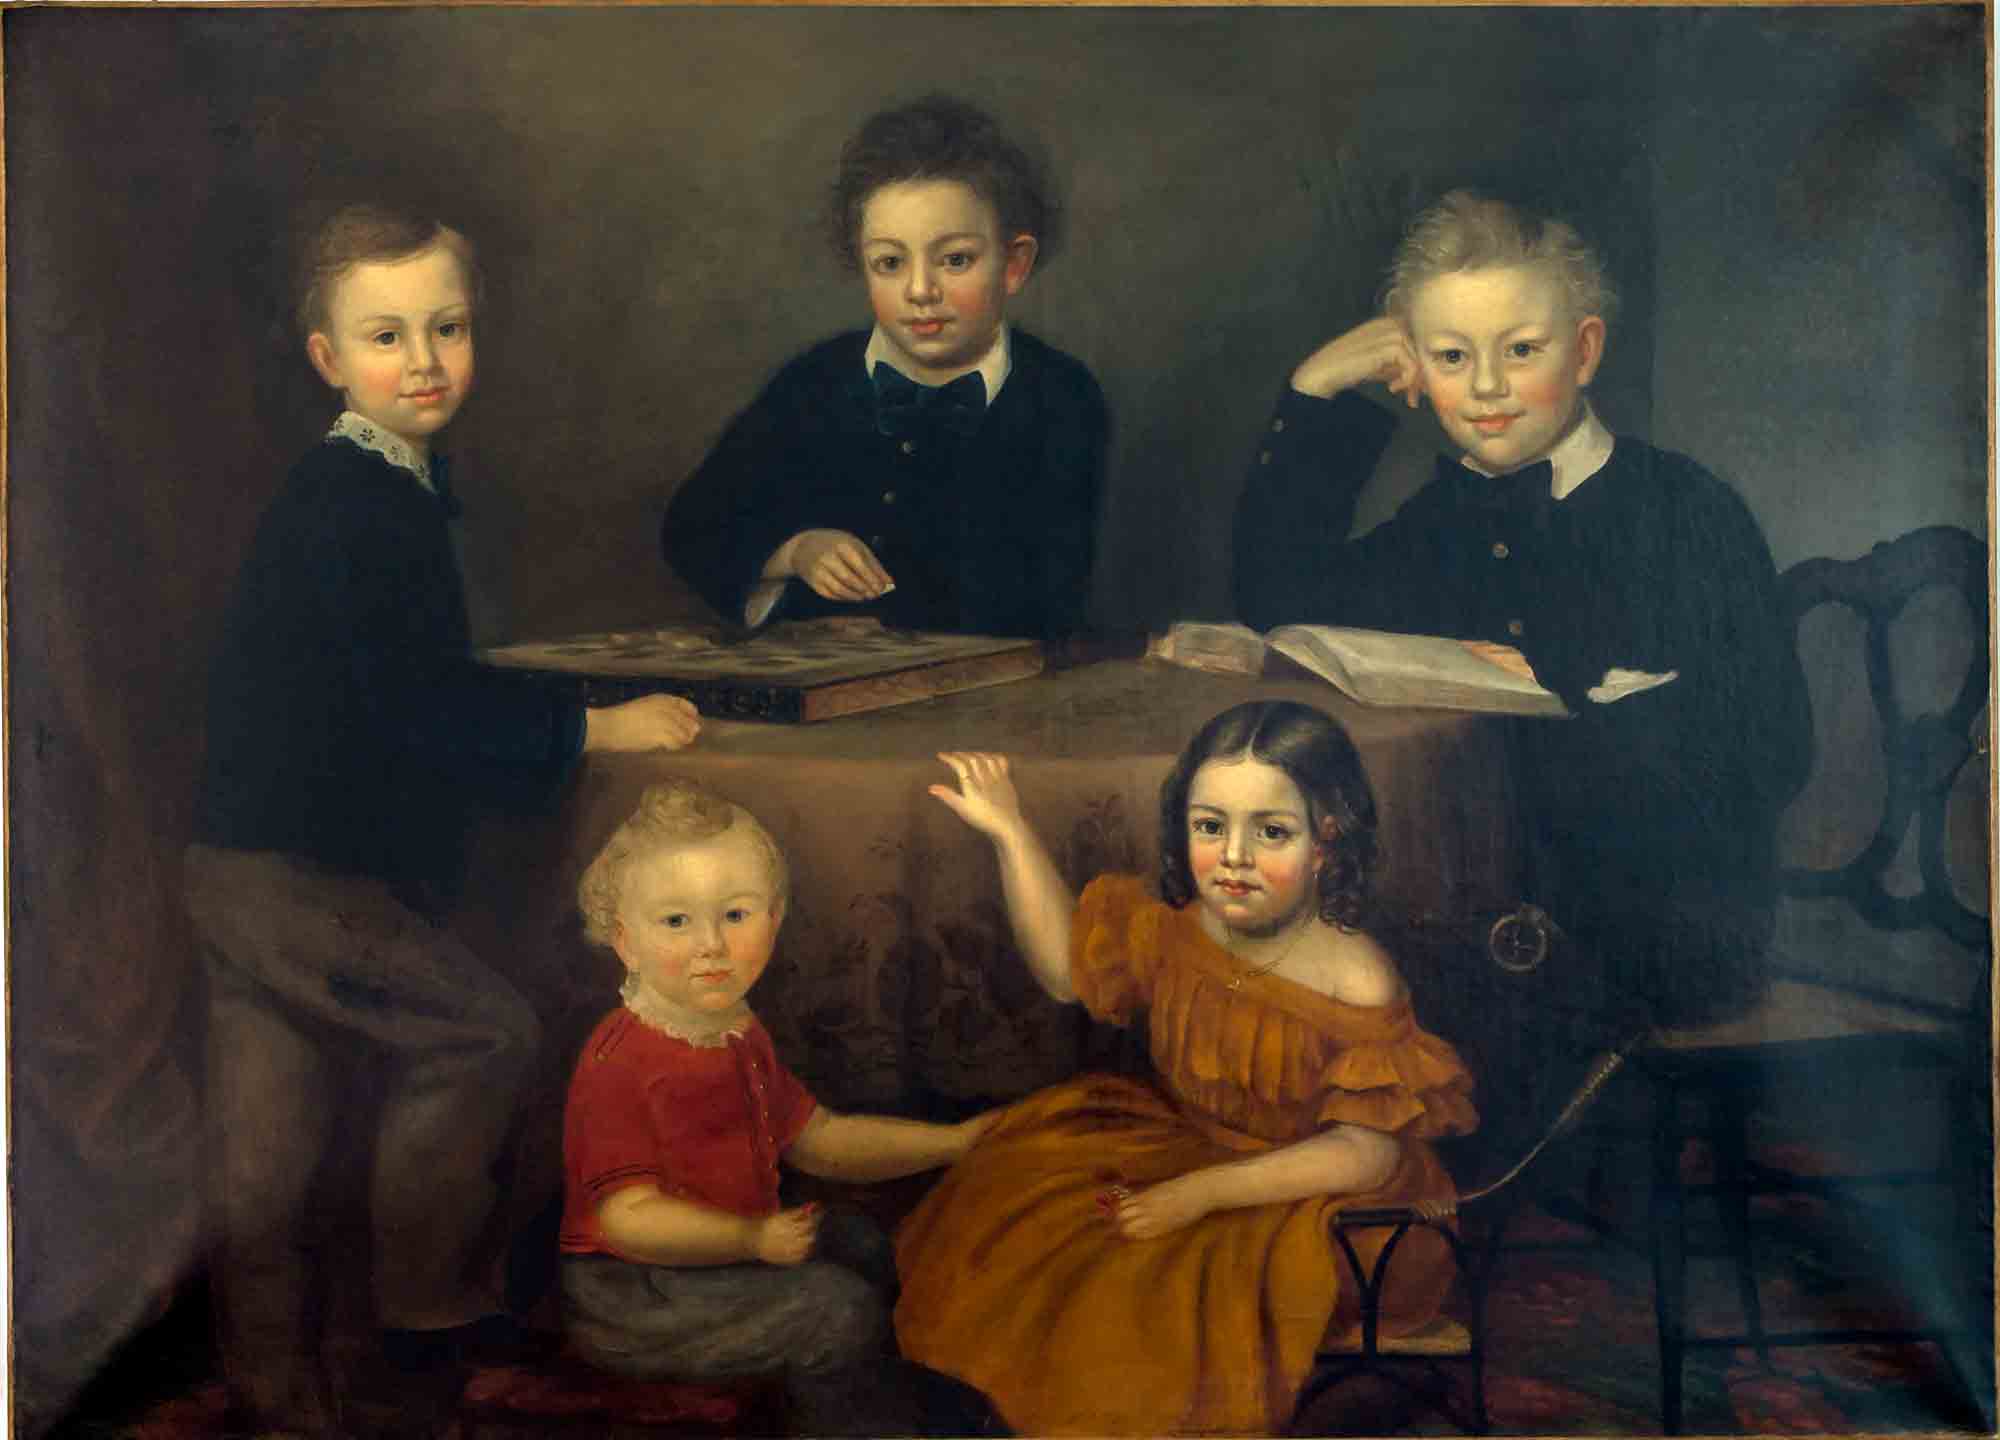 Group portrait of four young brothers and their young sister seated around a table.